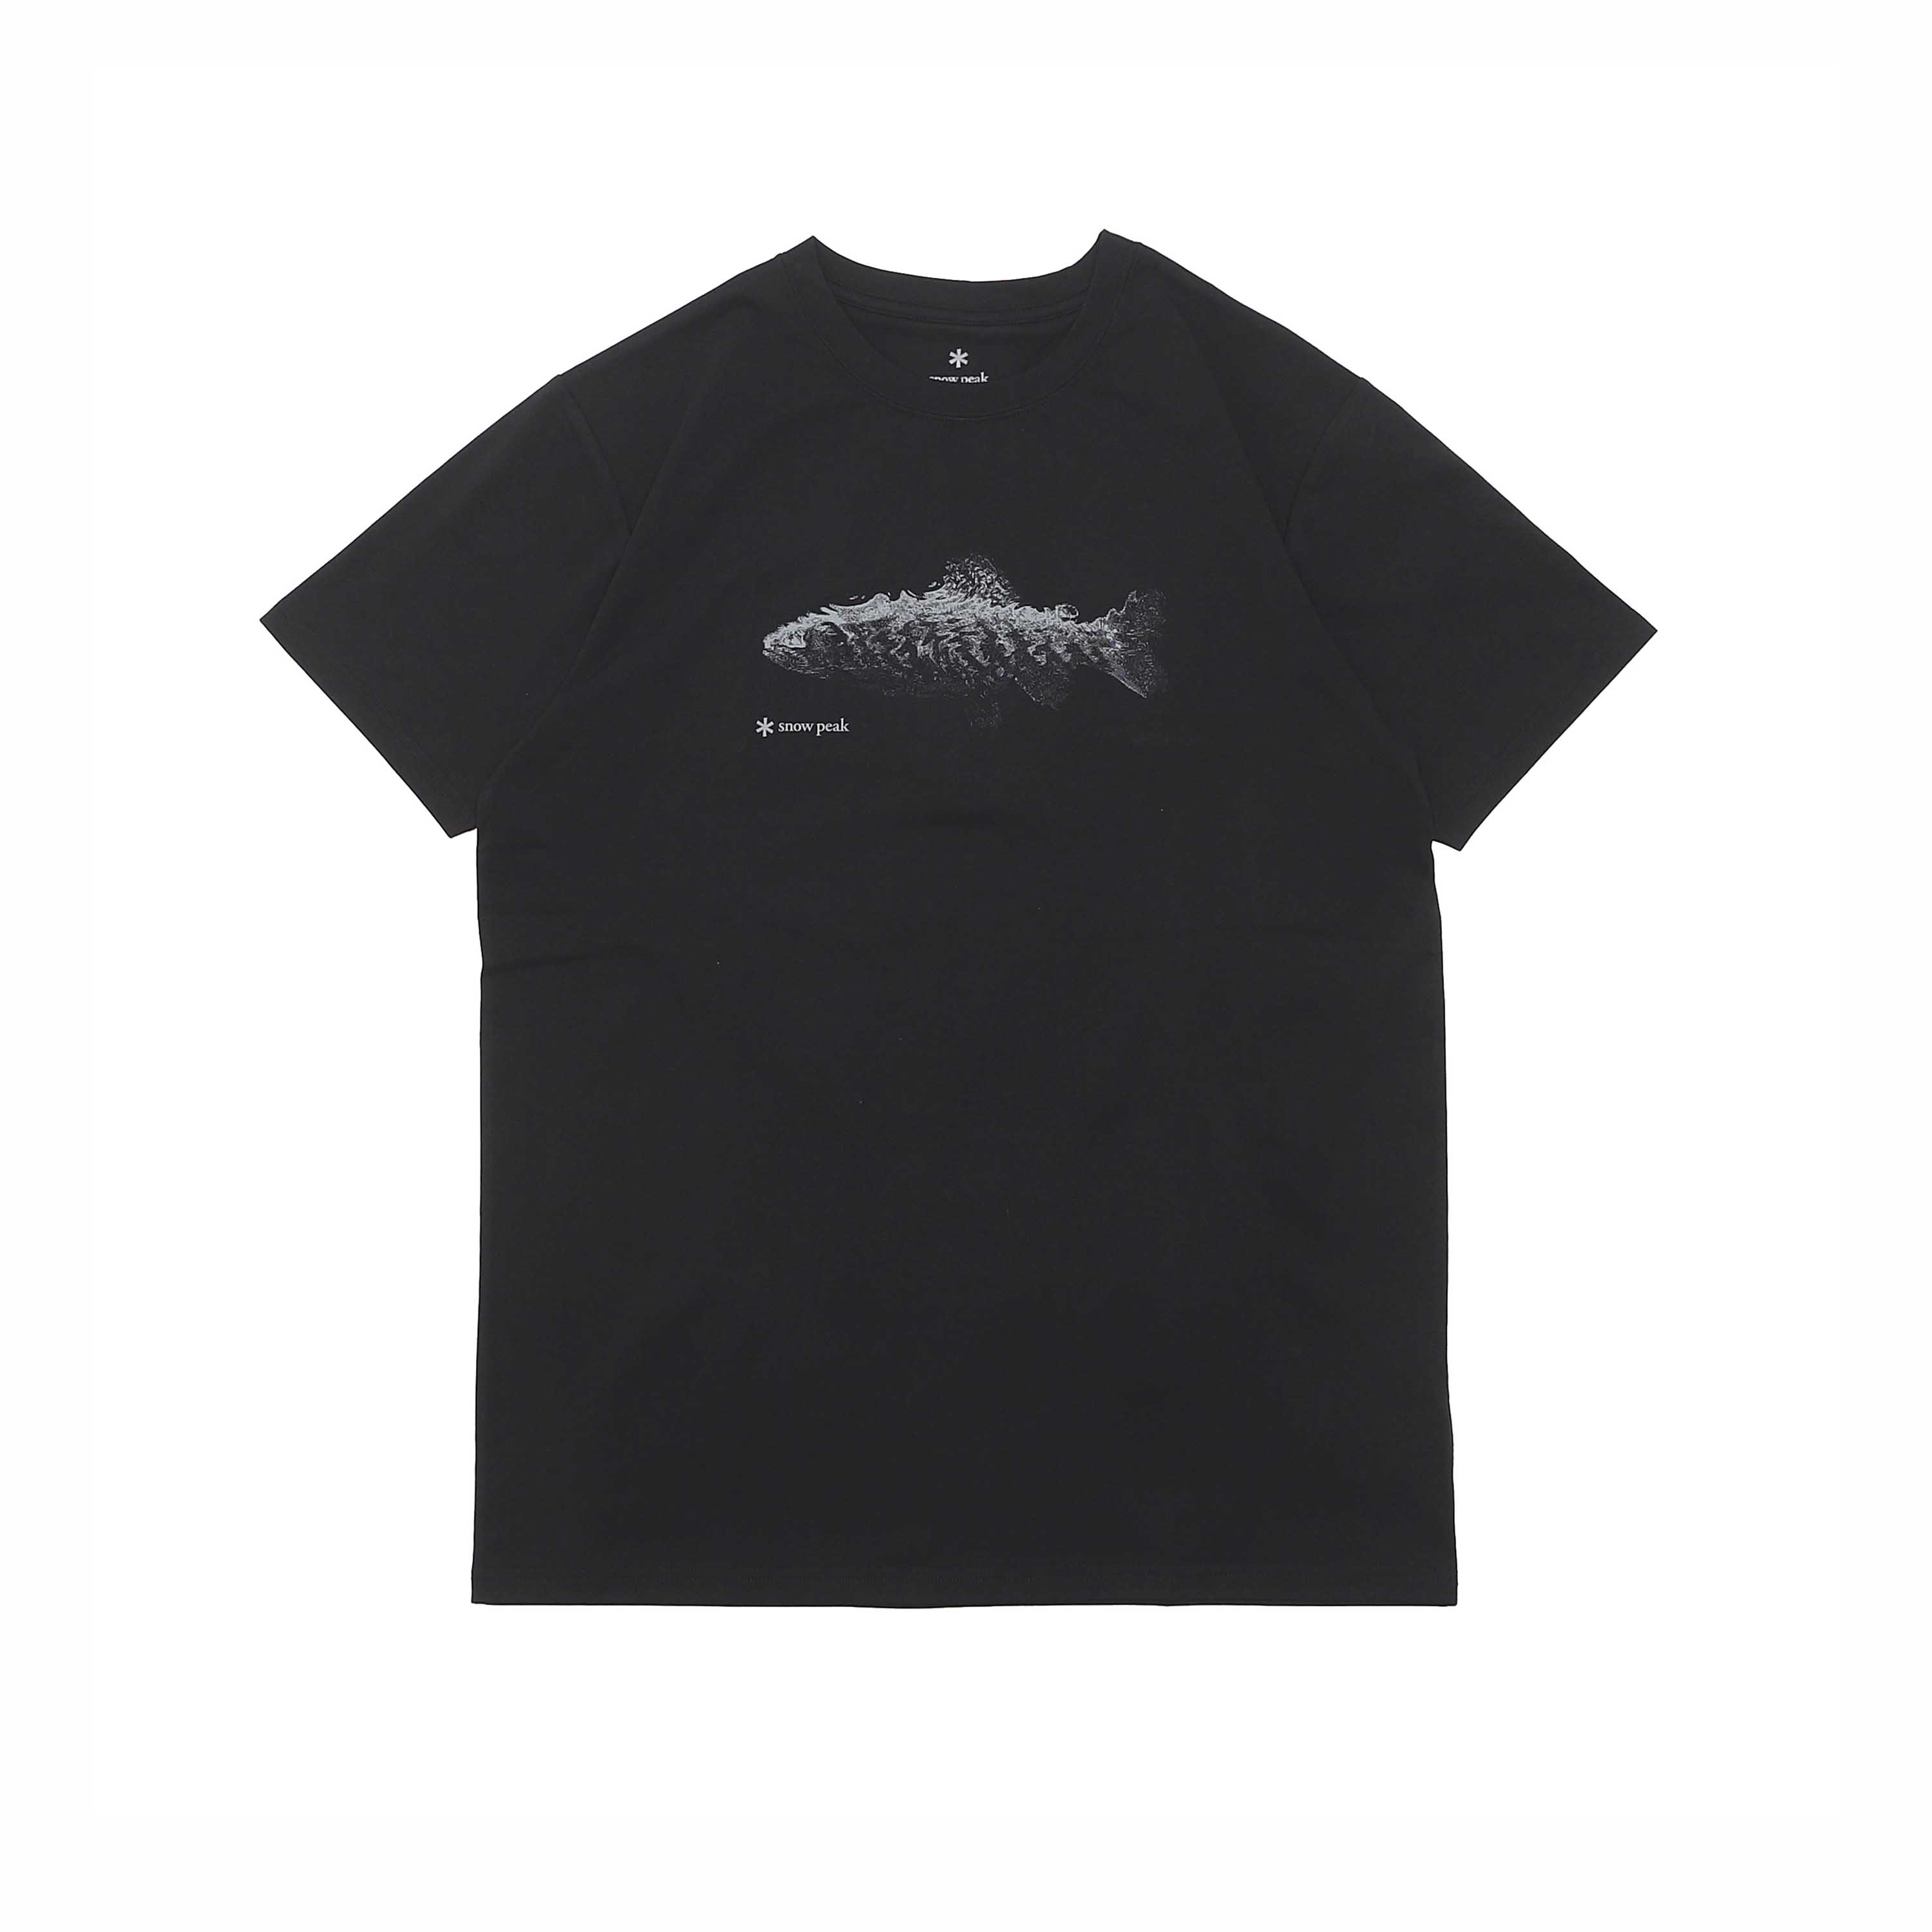 X TONED TROUT SIGN OF FISH S/S TEE - BLACK